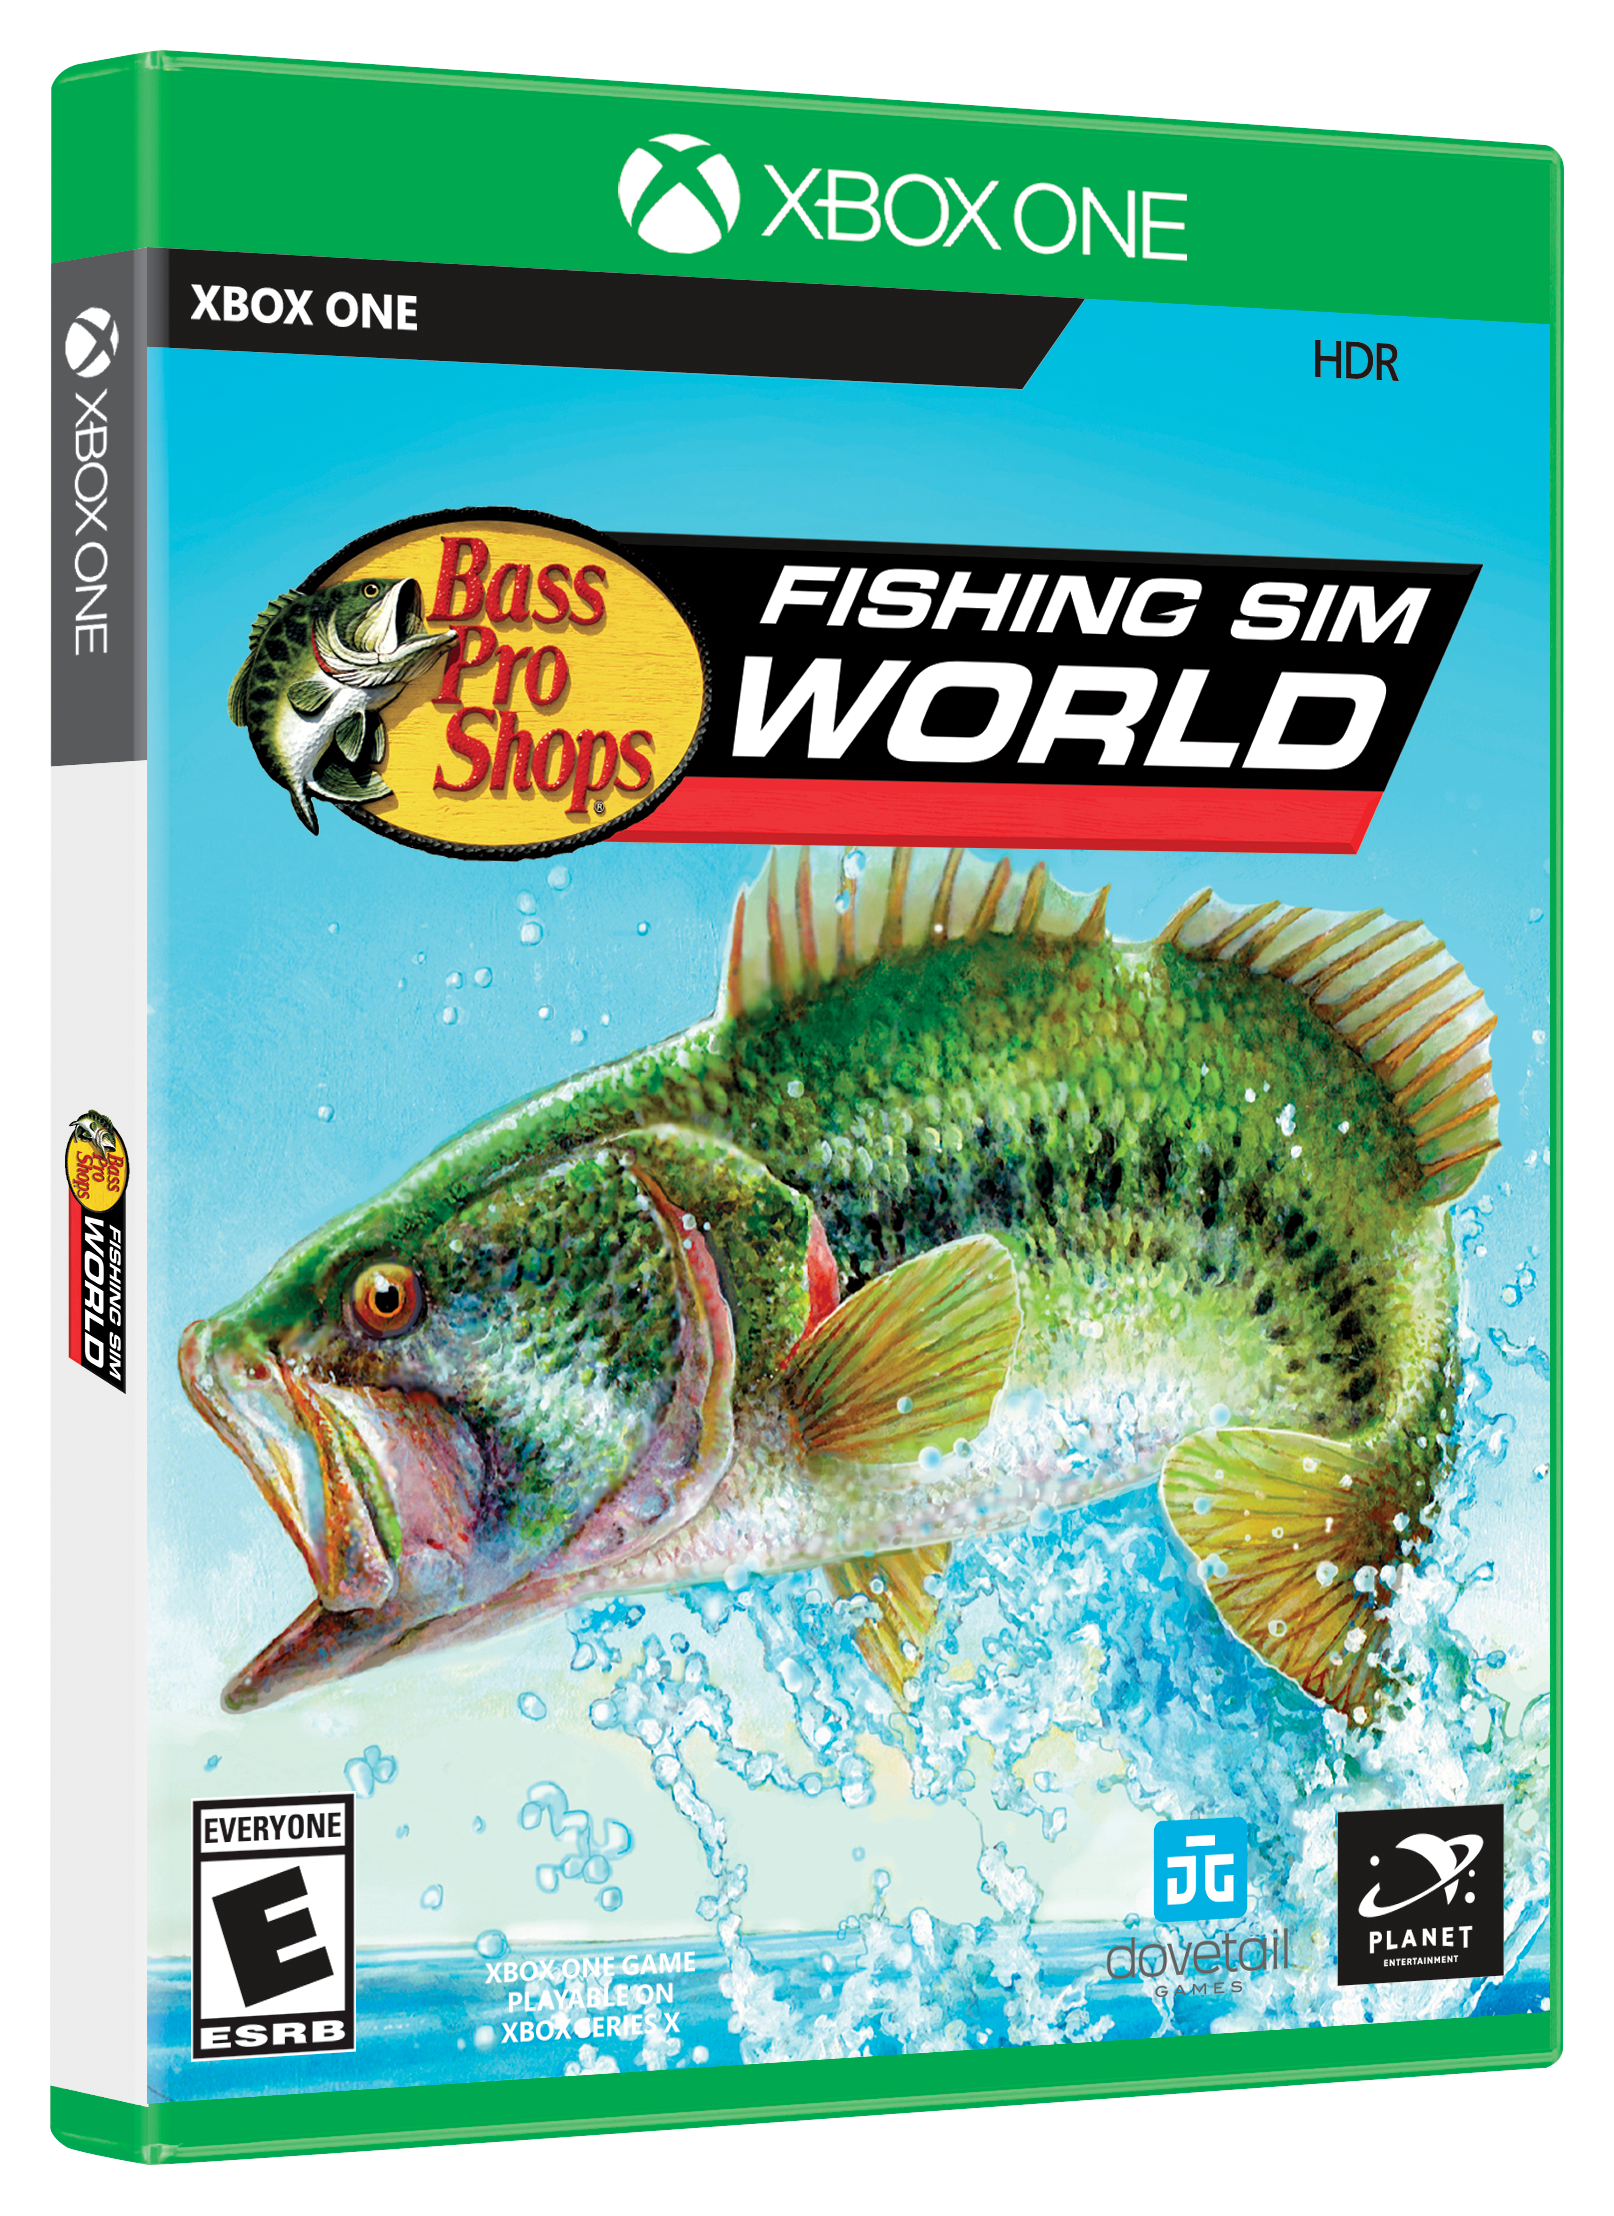 Bass Pro Shops Fishing Sim World Video Game for Xbox One